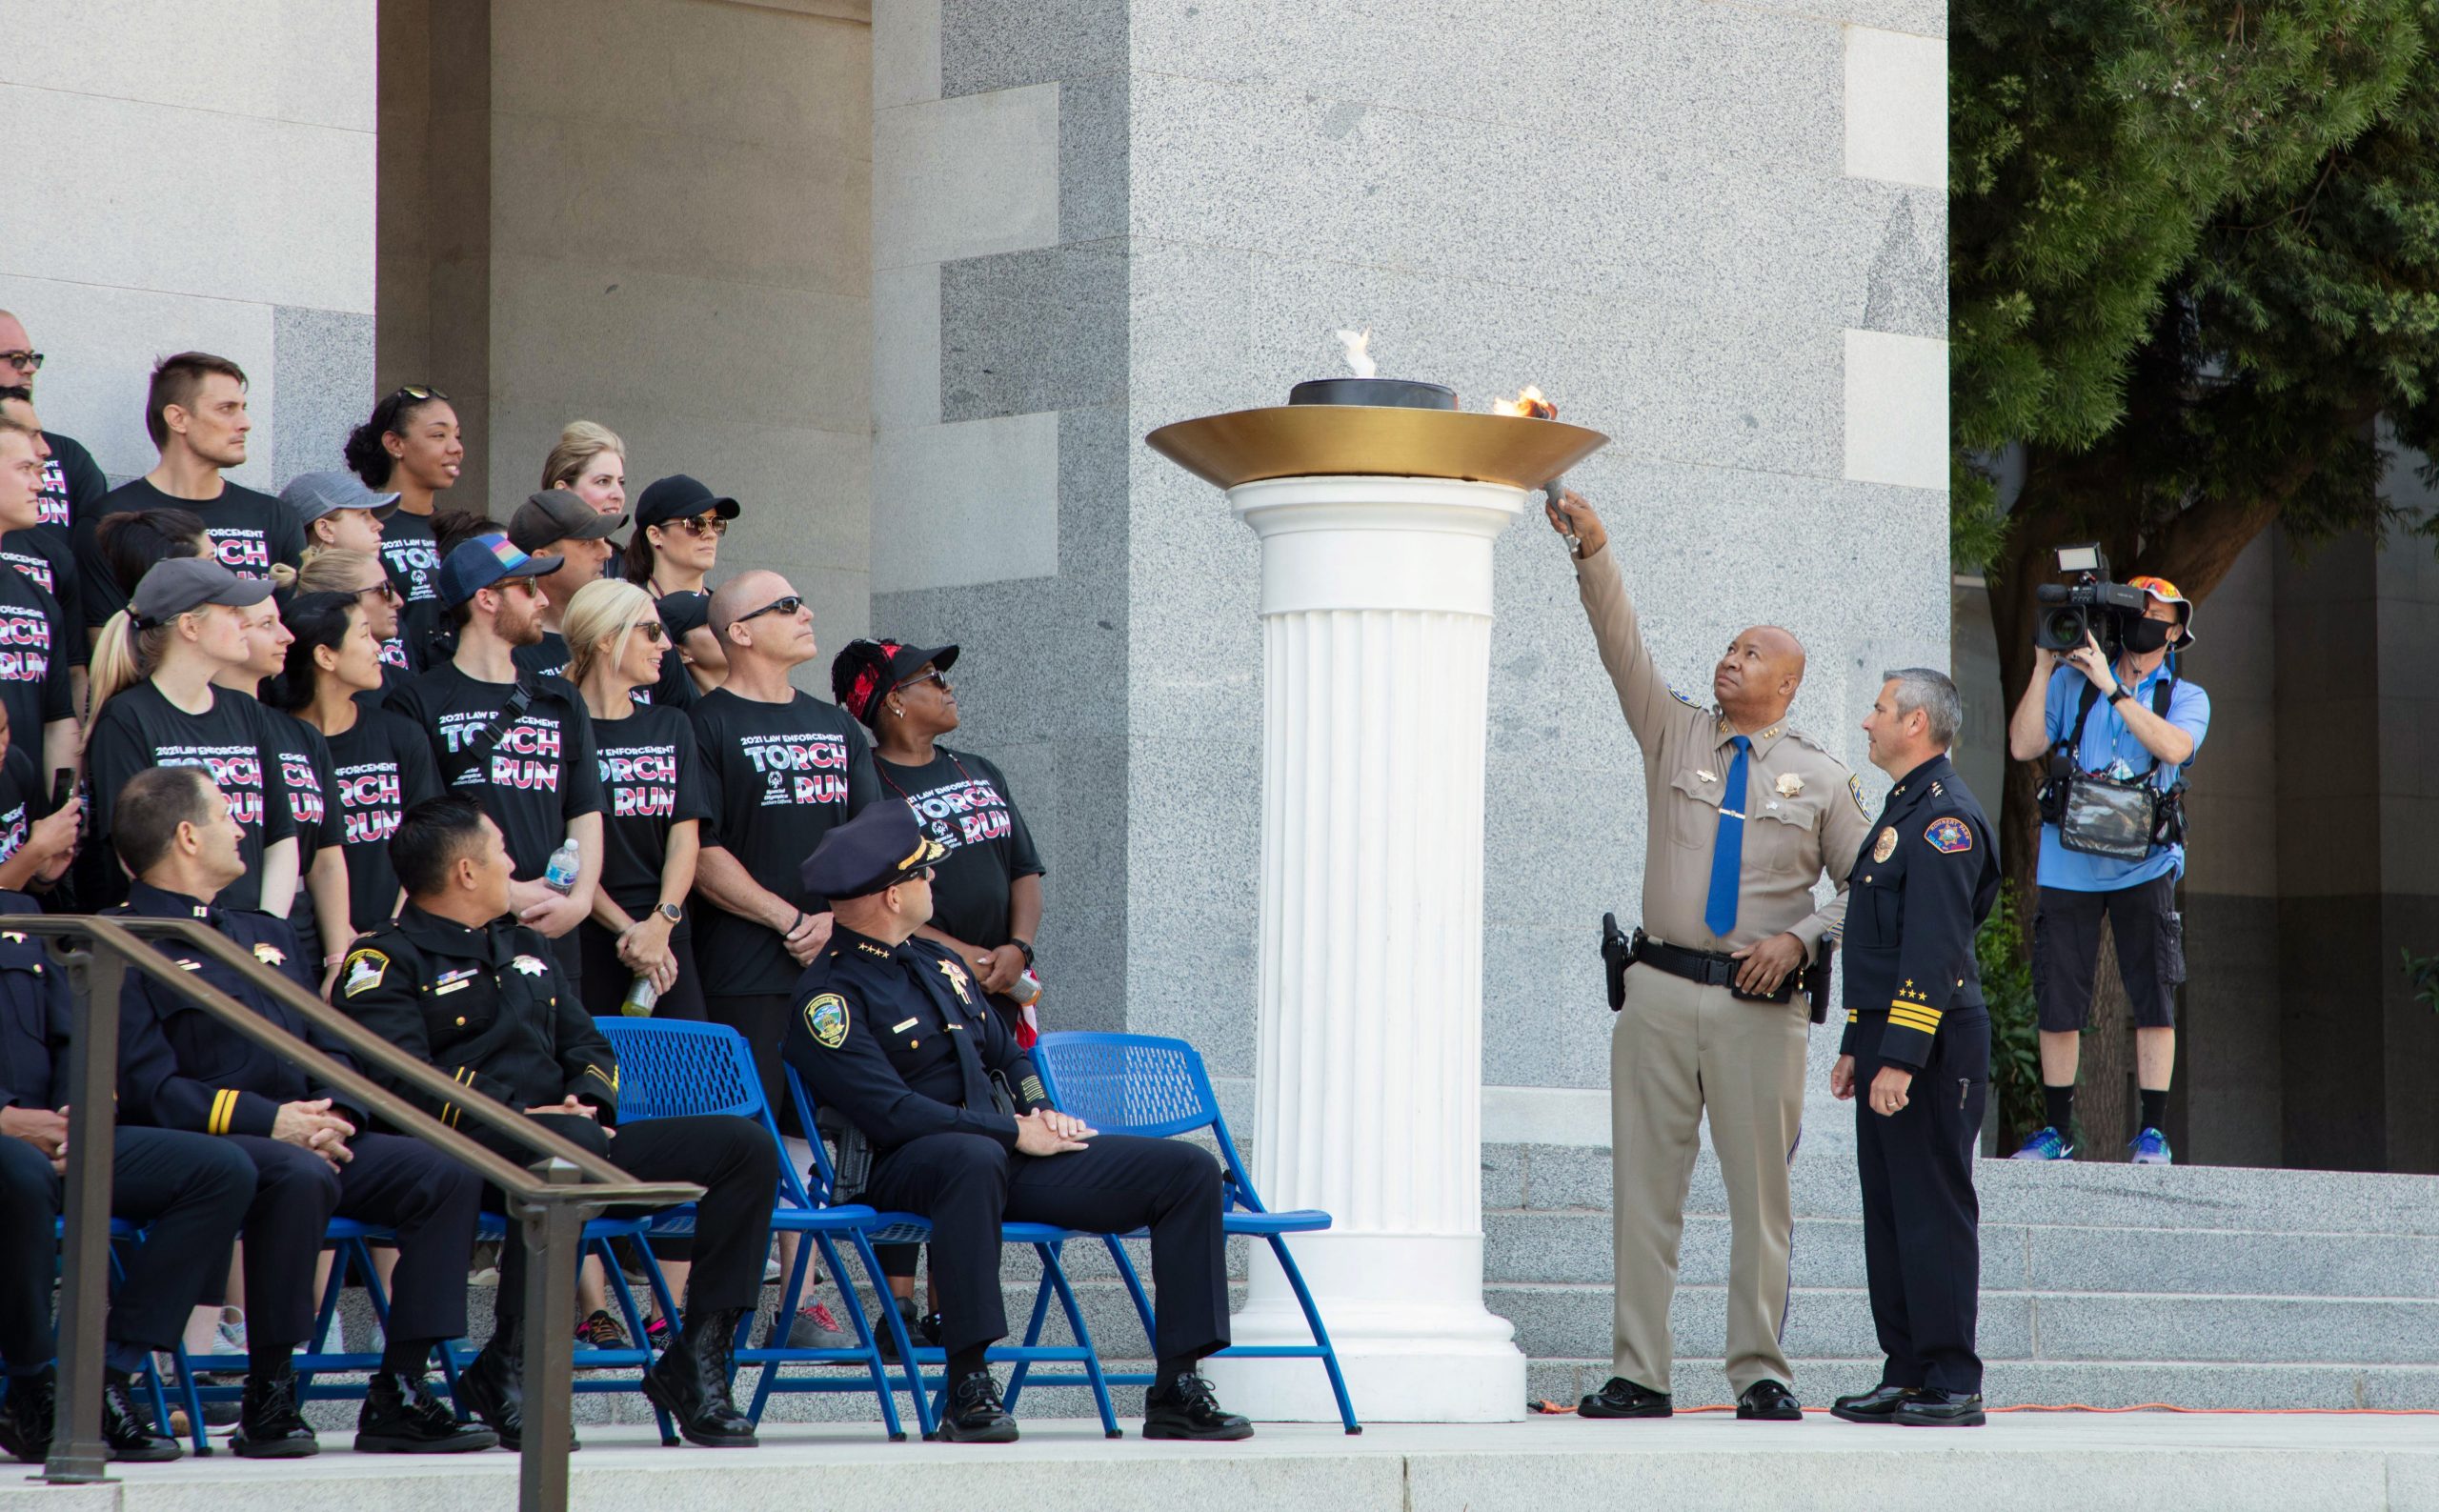 Two men light a cauldron at the end of the Special Olympics Torch Run.